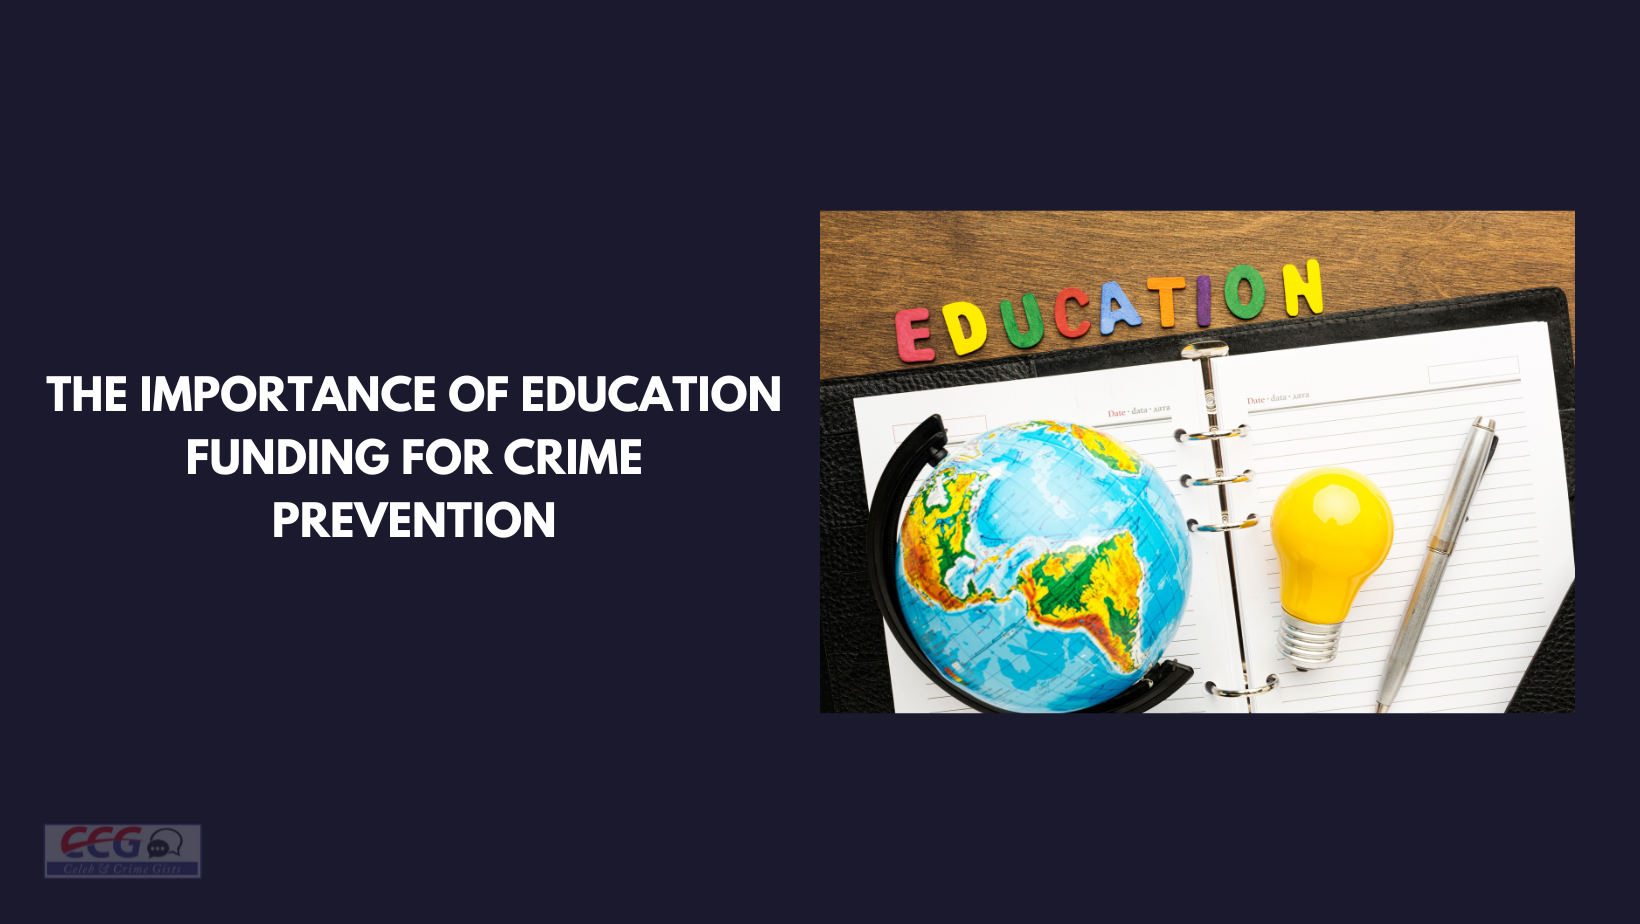 Education funding and crime prevention